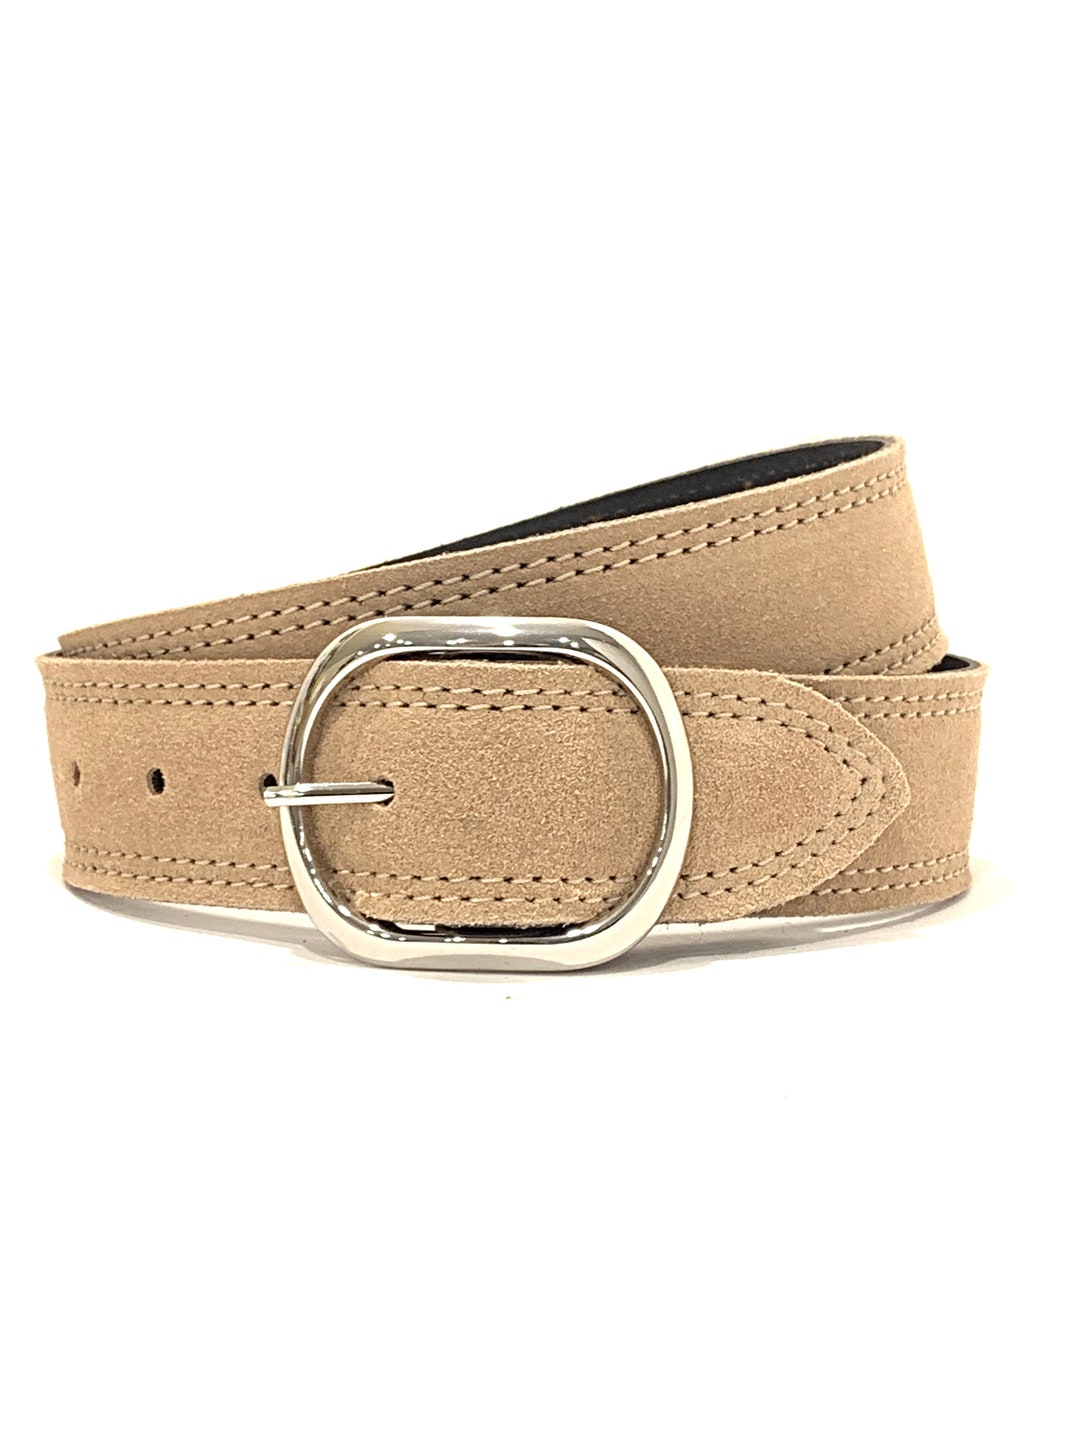 Taupe Suede Belt With INTERCHANGEABLE Silver Buckle and Gold Oval ...